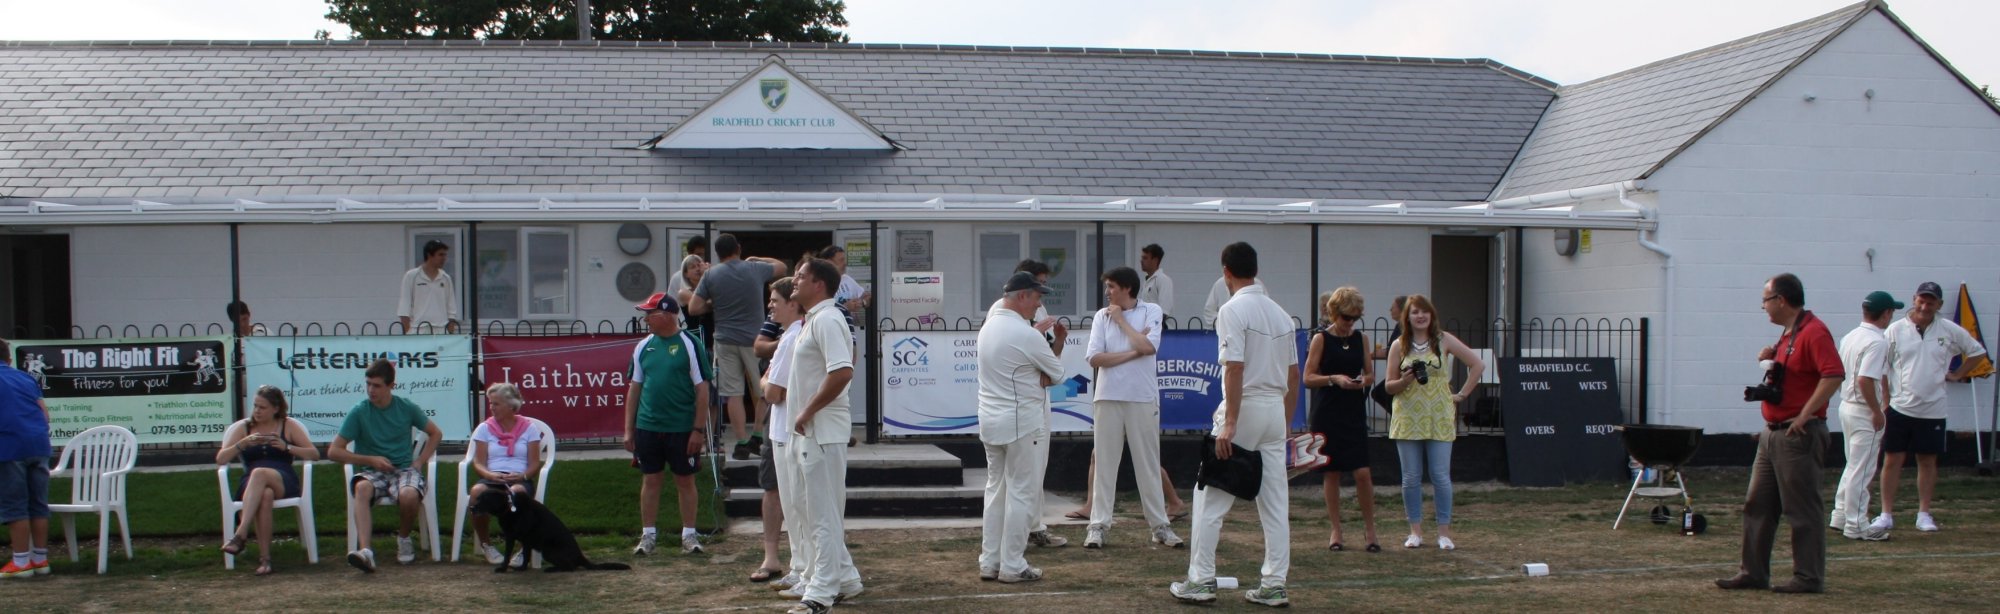 The new Bradfield Cricket Club Pavilion plays host to Laithwaites in-house match